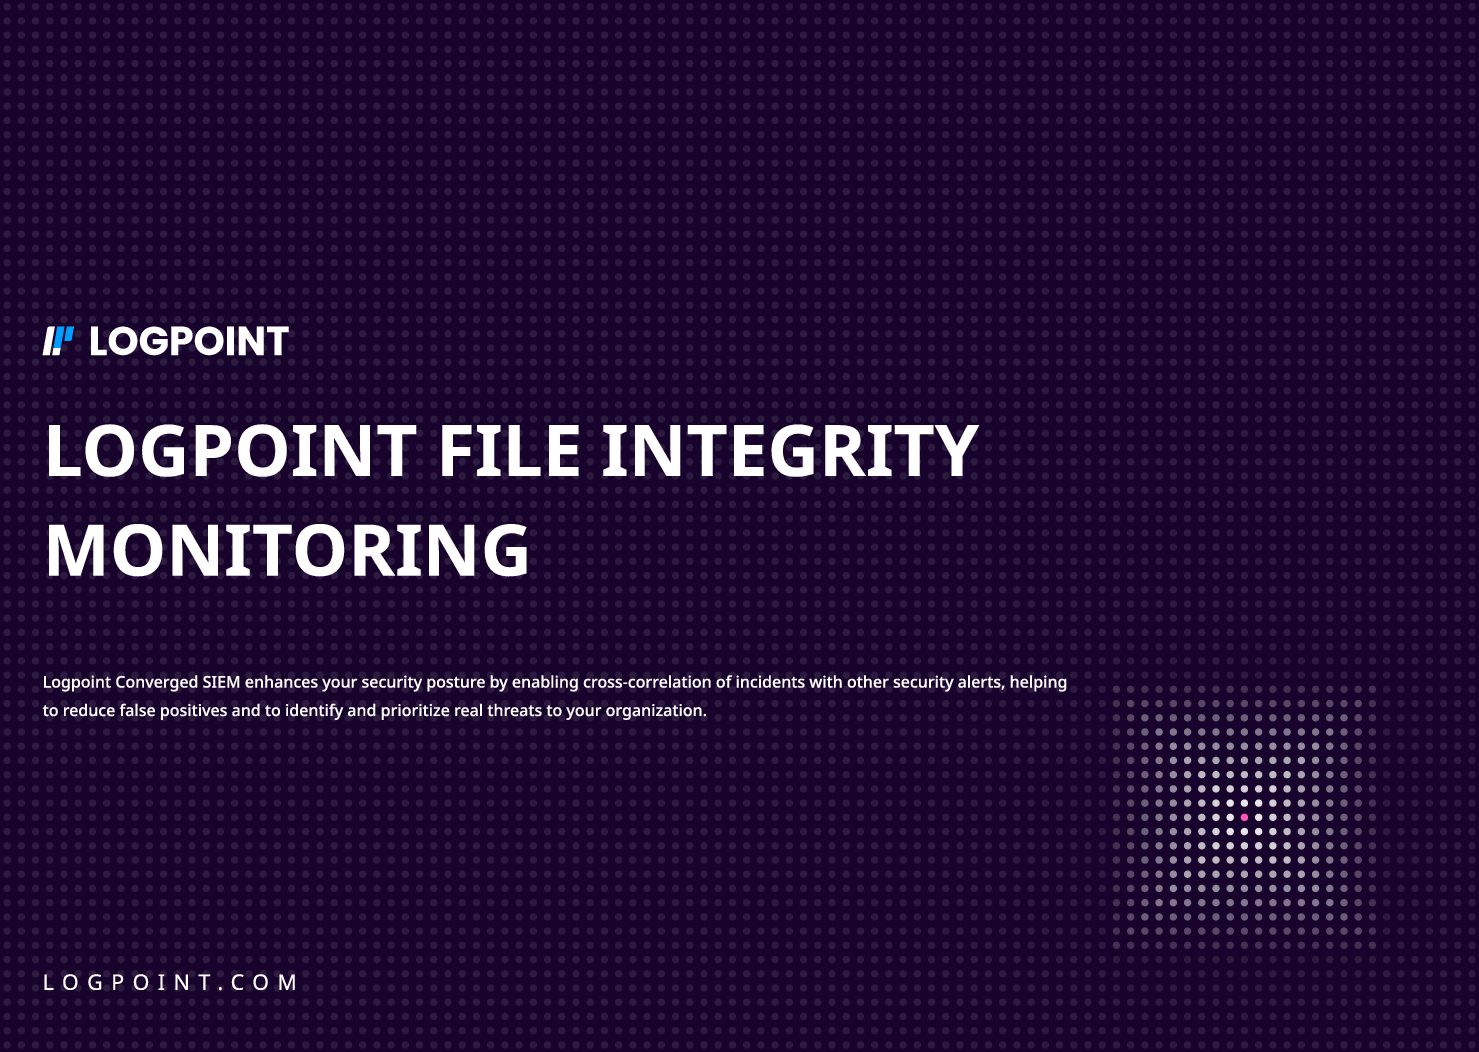 LogPoint File Integrity Monitoring